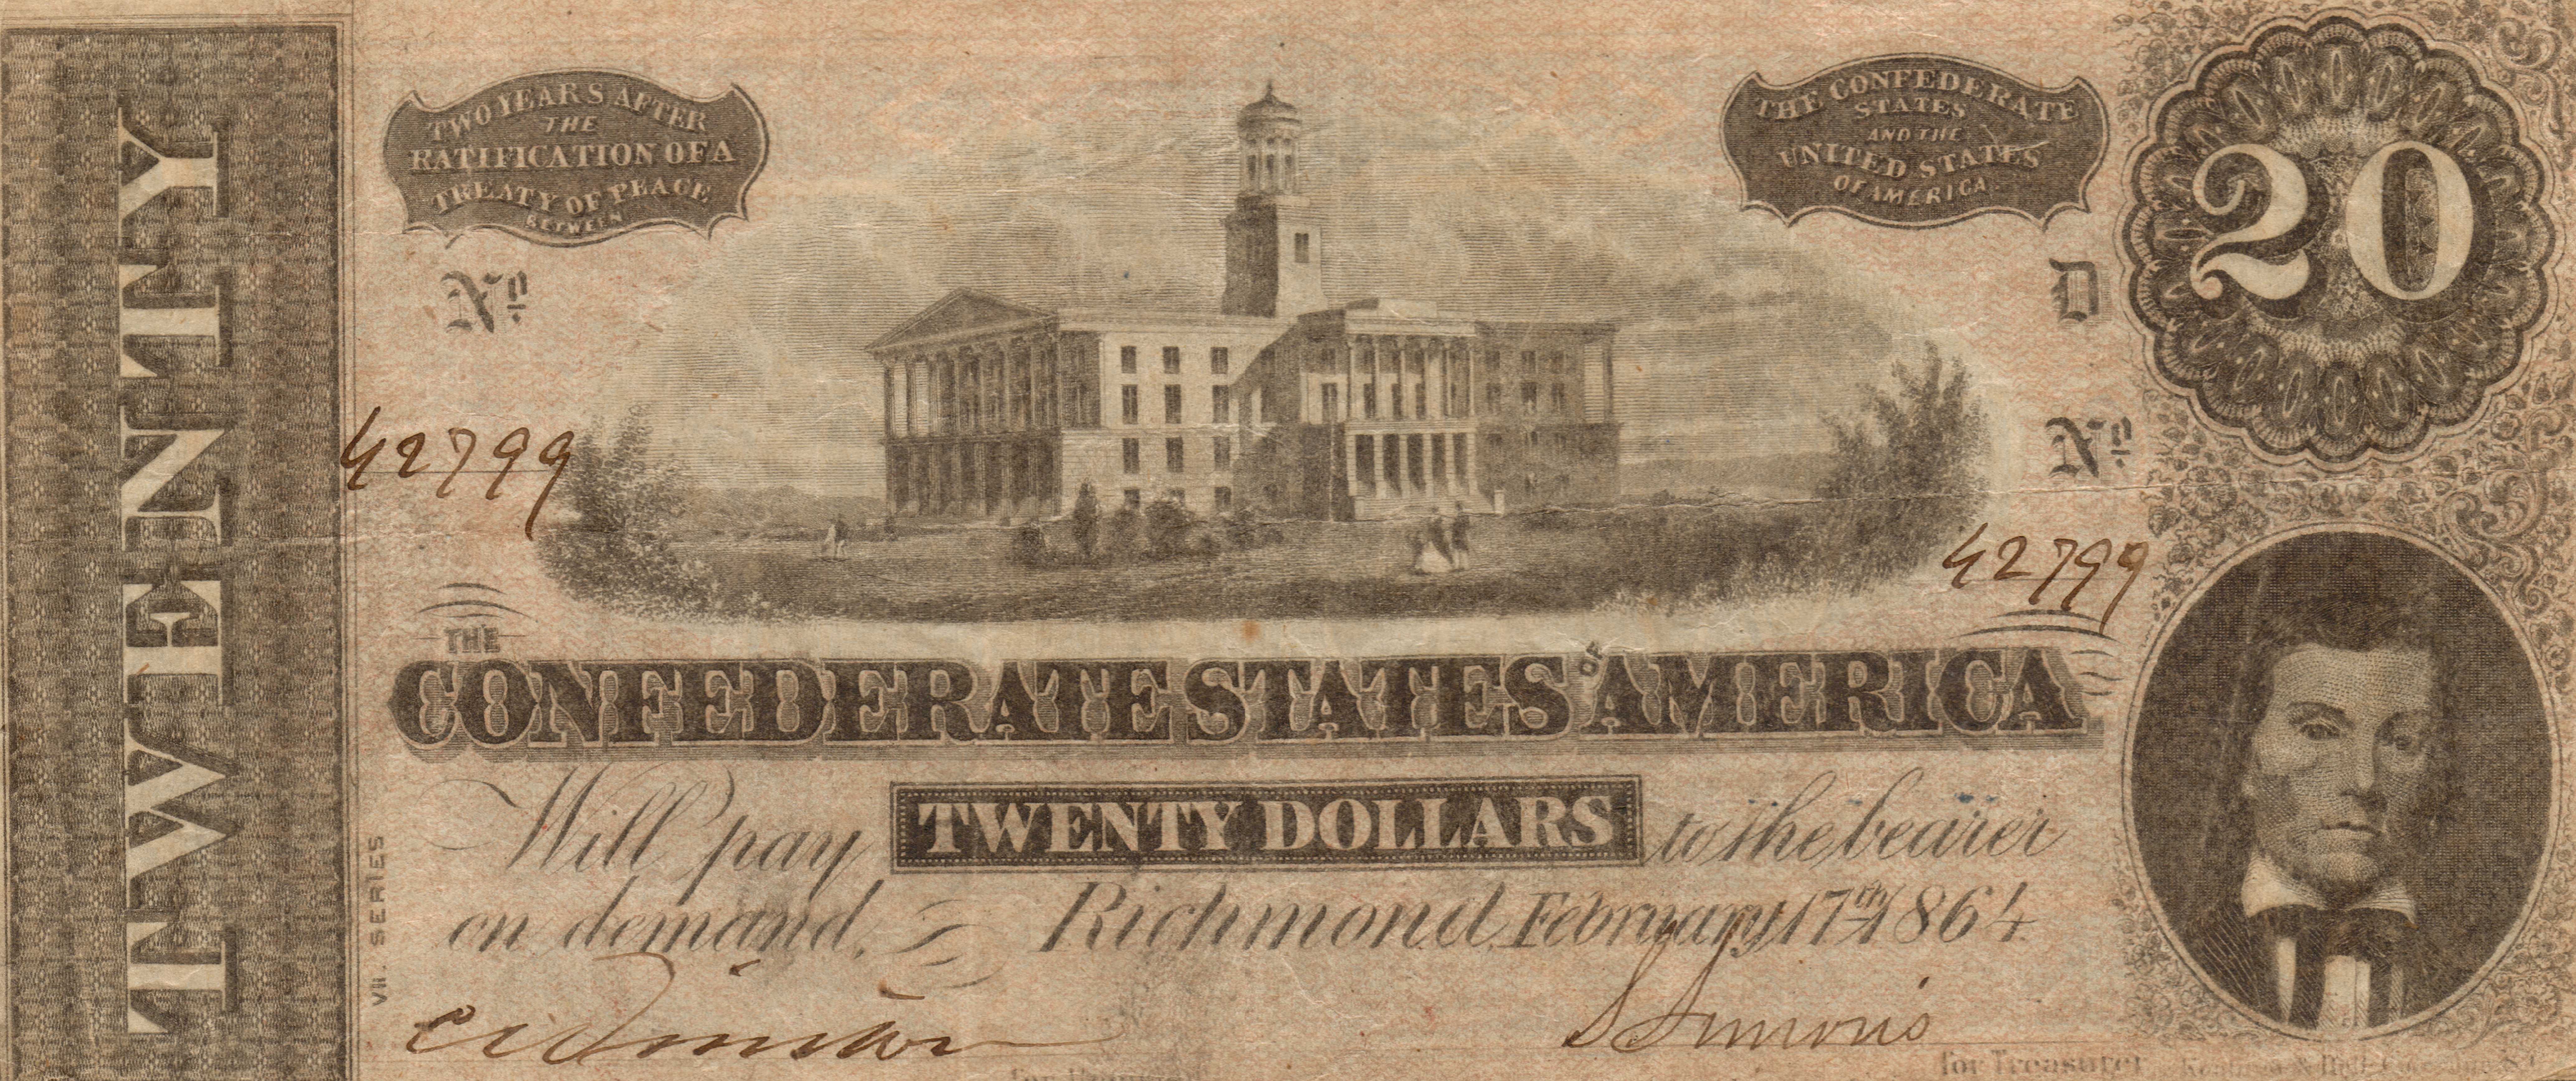 man made, confederate states of america dollar, currencies